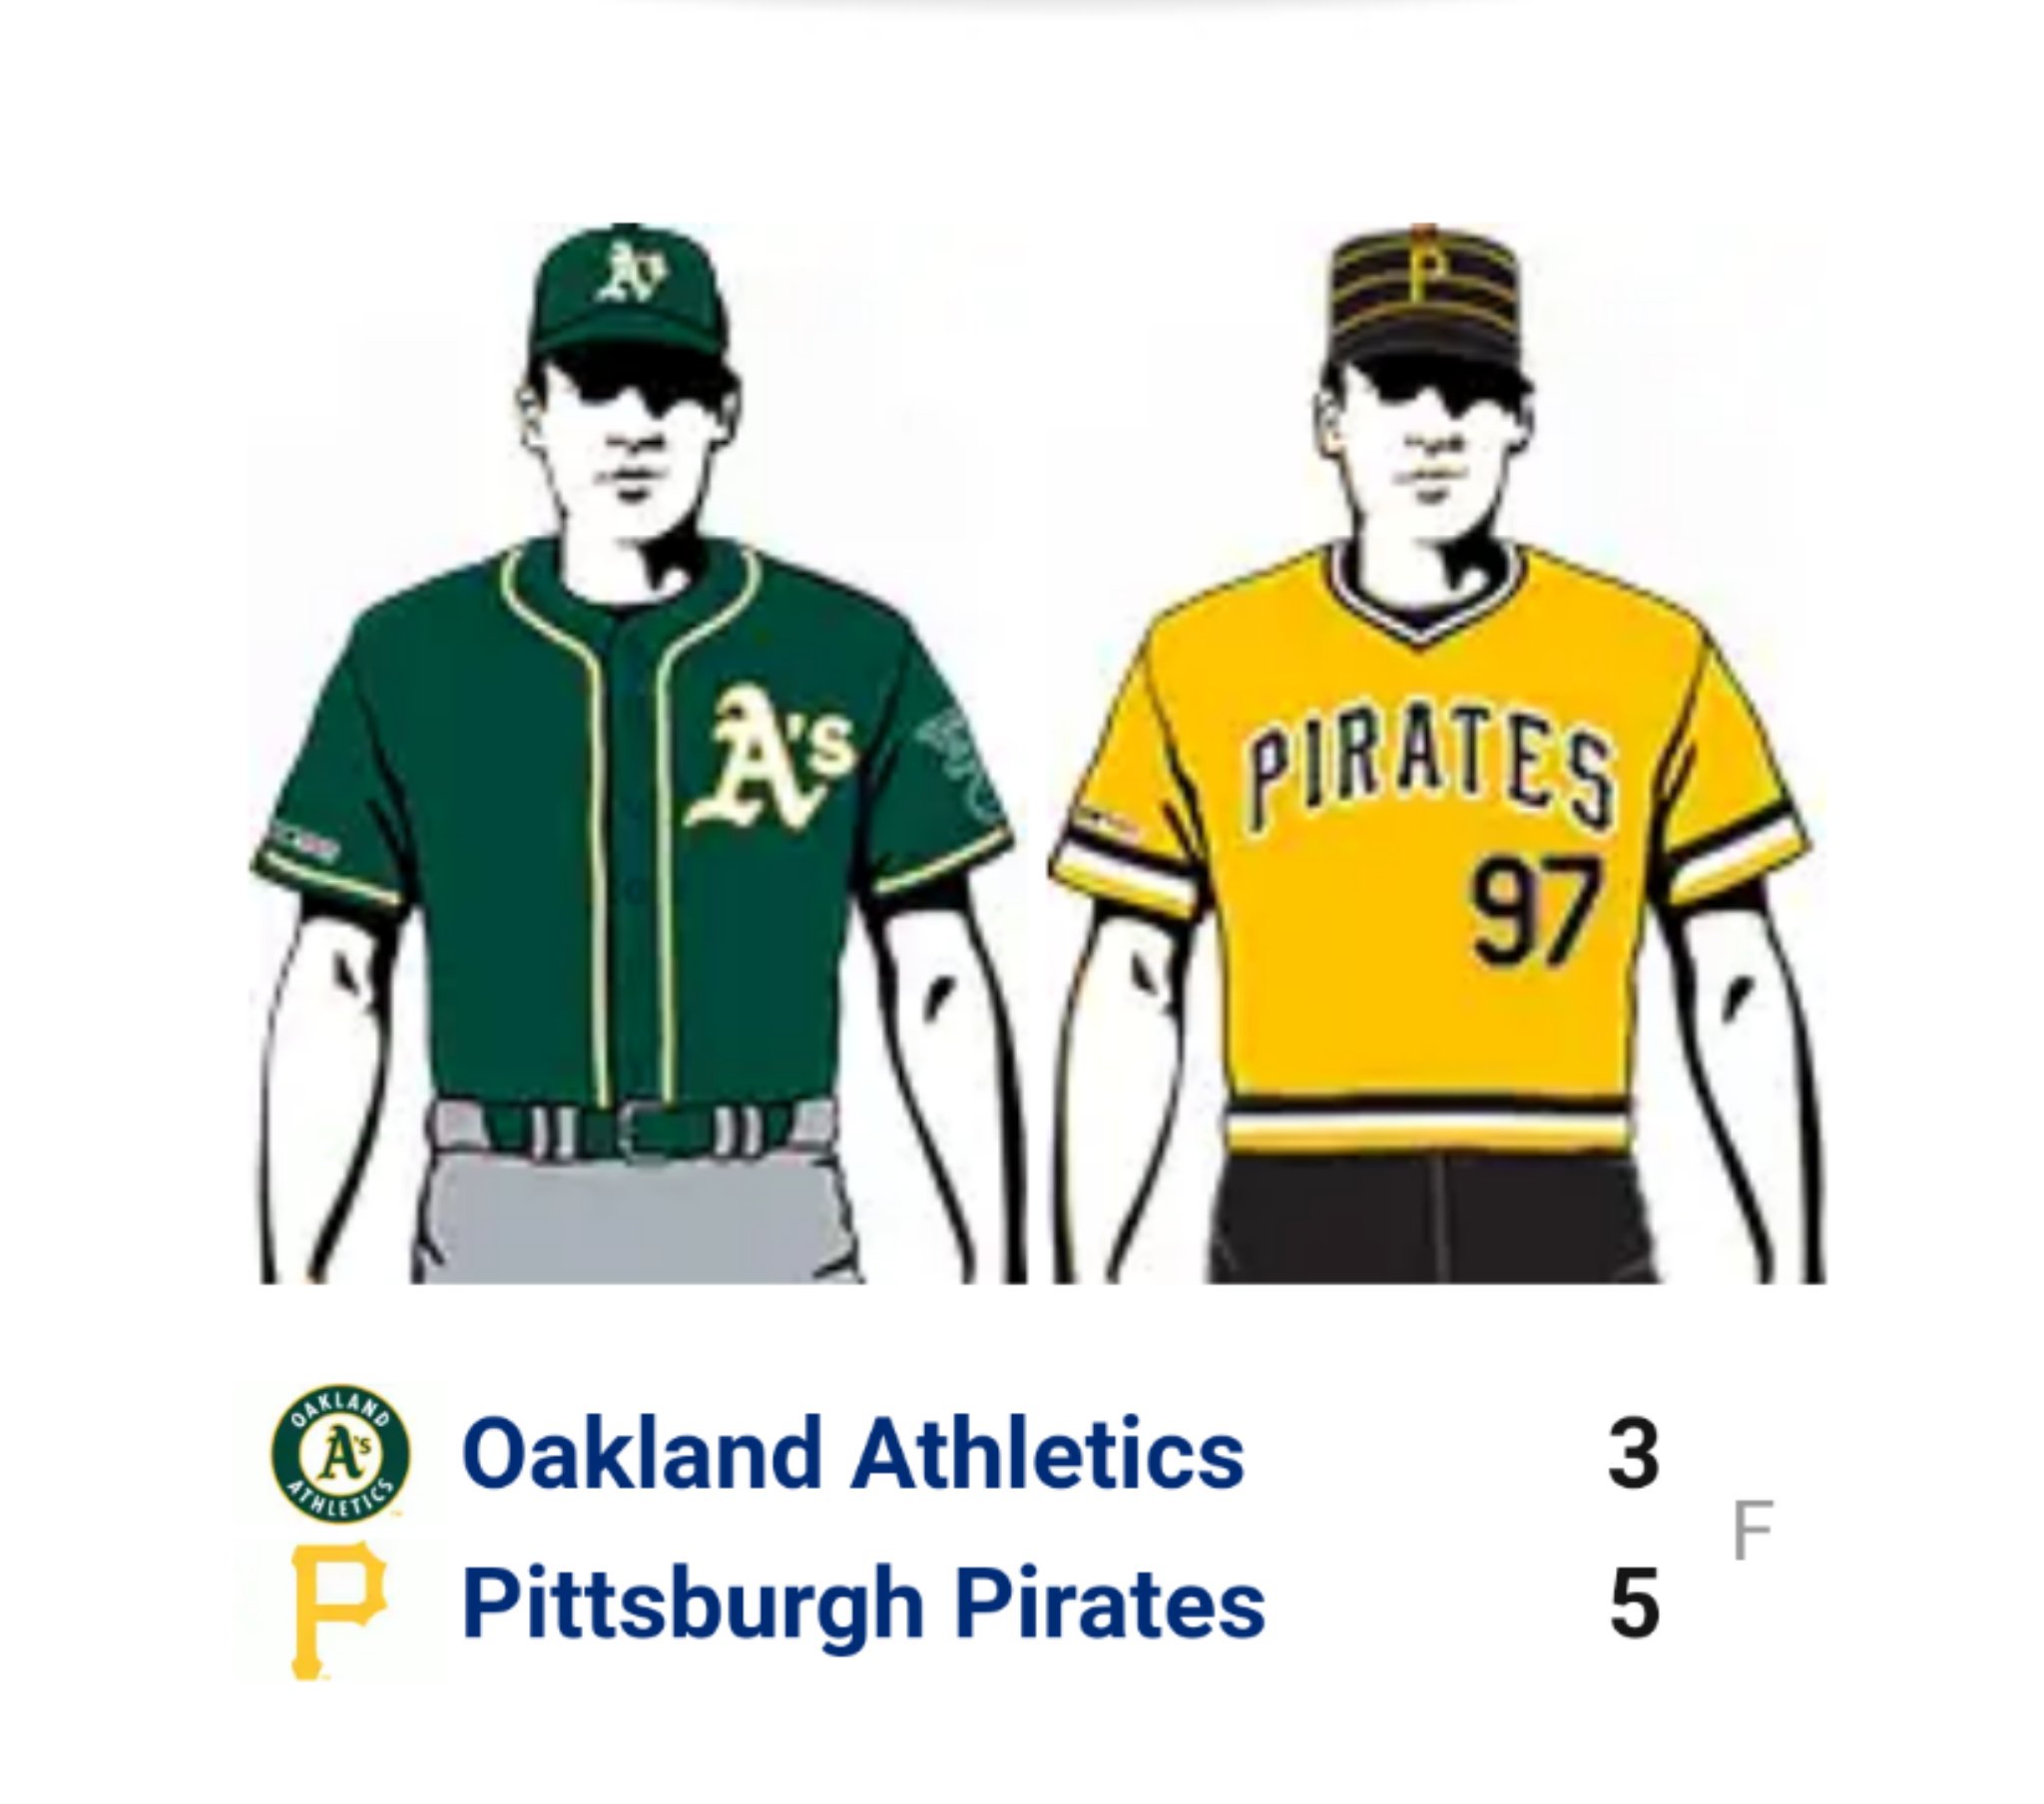 Chris Creamer  SportsLogos.Net on X: As far as I can tell, this  afternoon's #Athletics vs #Pirates game was the first yellow jersey vs  green jersey game in #MLB regular season history